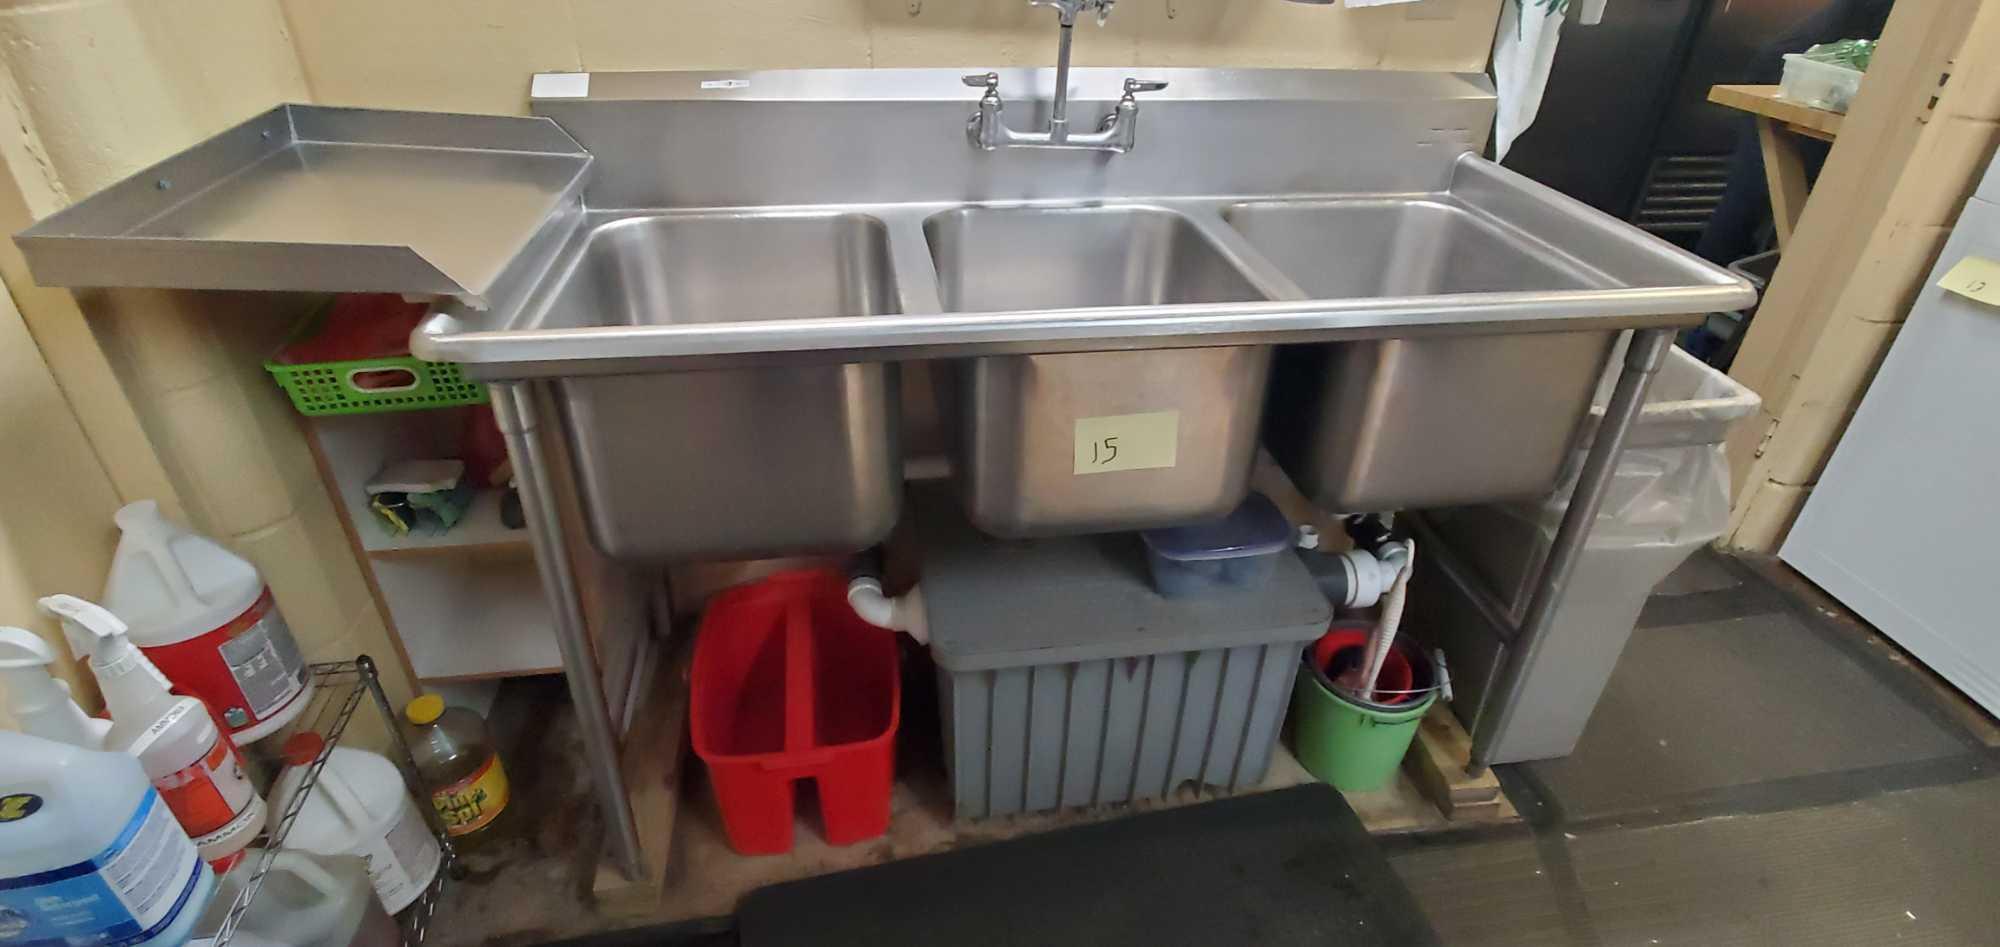 K- Advanced (3) Tub Stainless Steel Sink with Sprayer